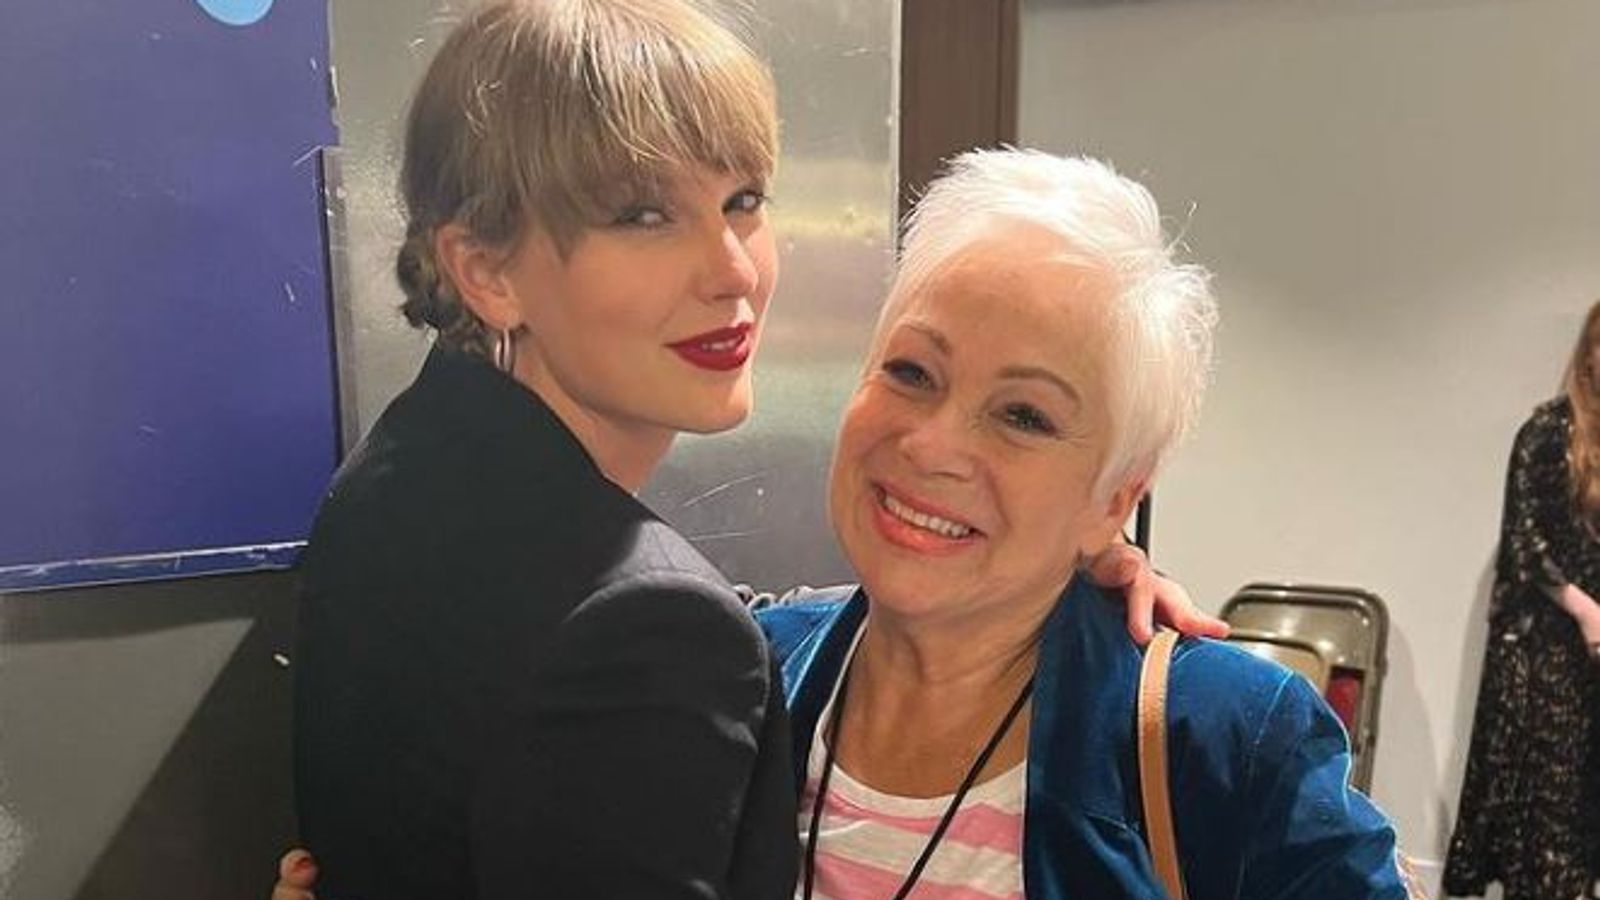 Taylor Swift fans highlight Denise Welch photo amid reports of relationship with The 1975's Matt Healy